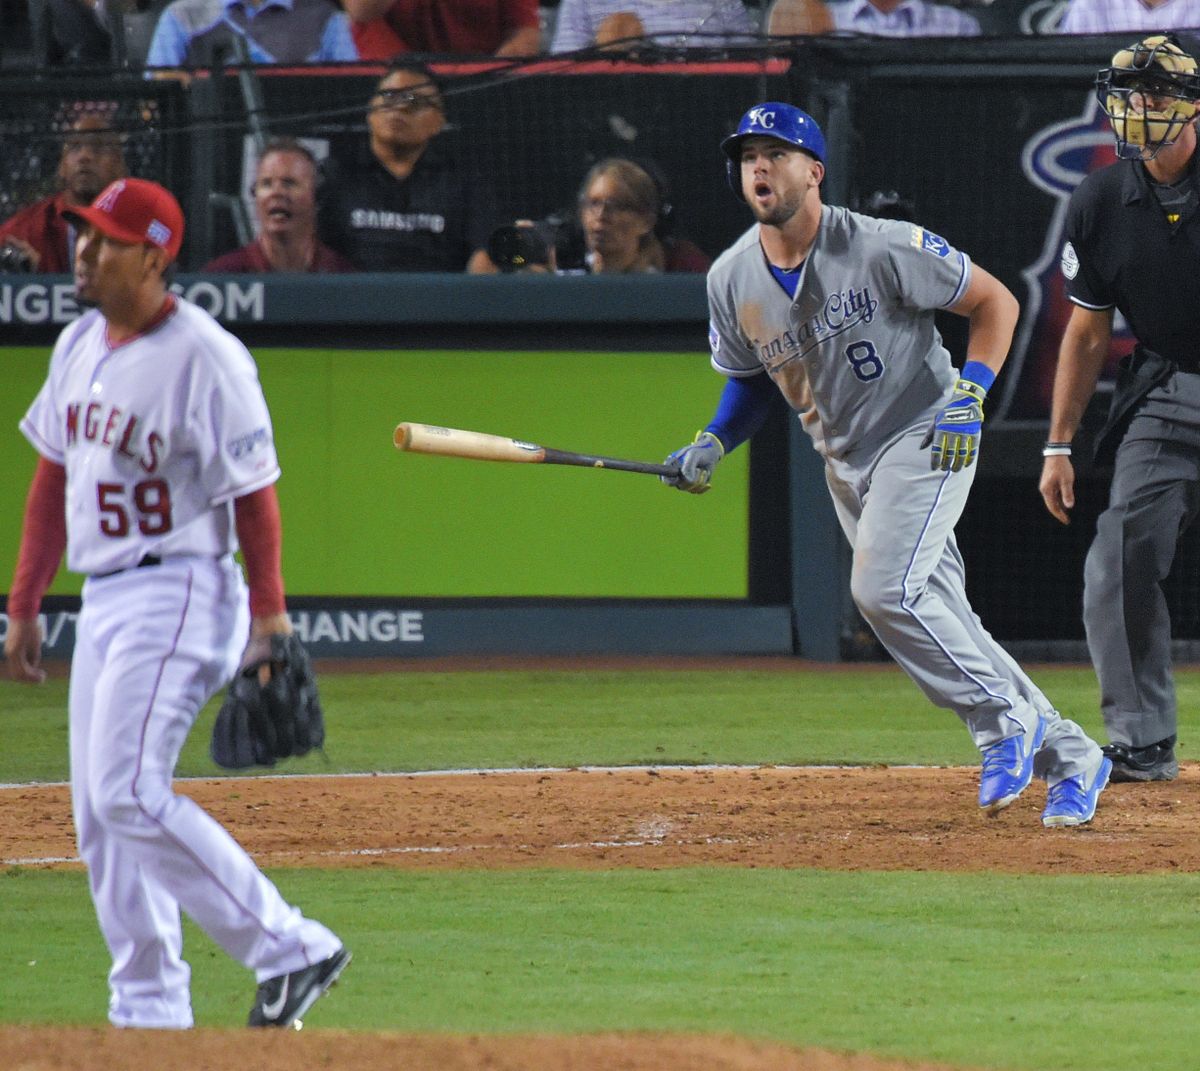 Eric Hosmer, Mike Moustakas guide Royals into ALCS